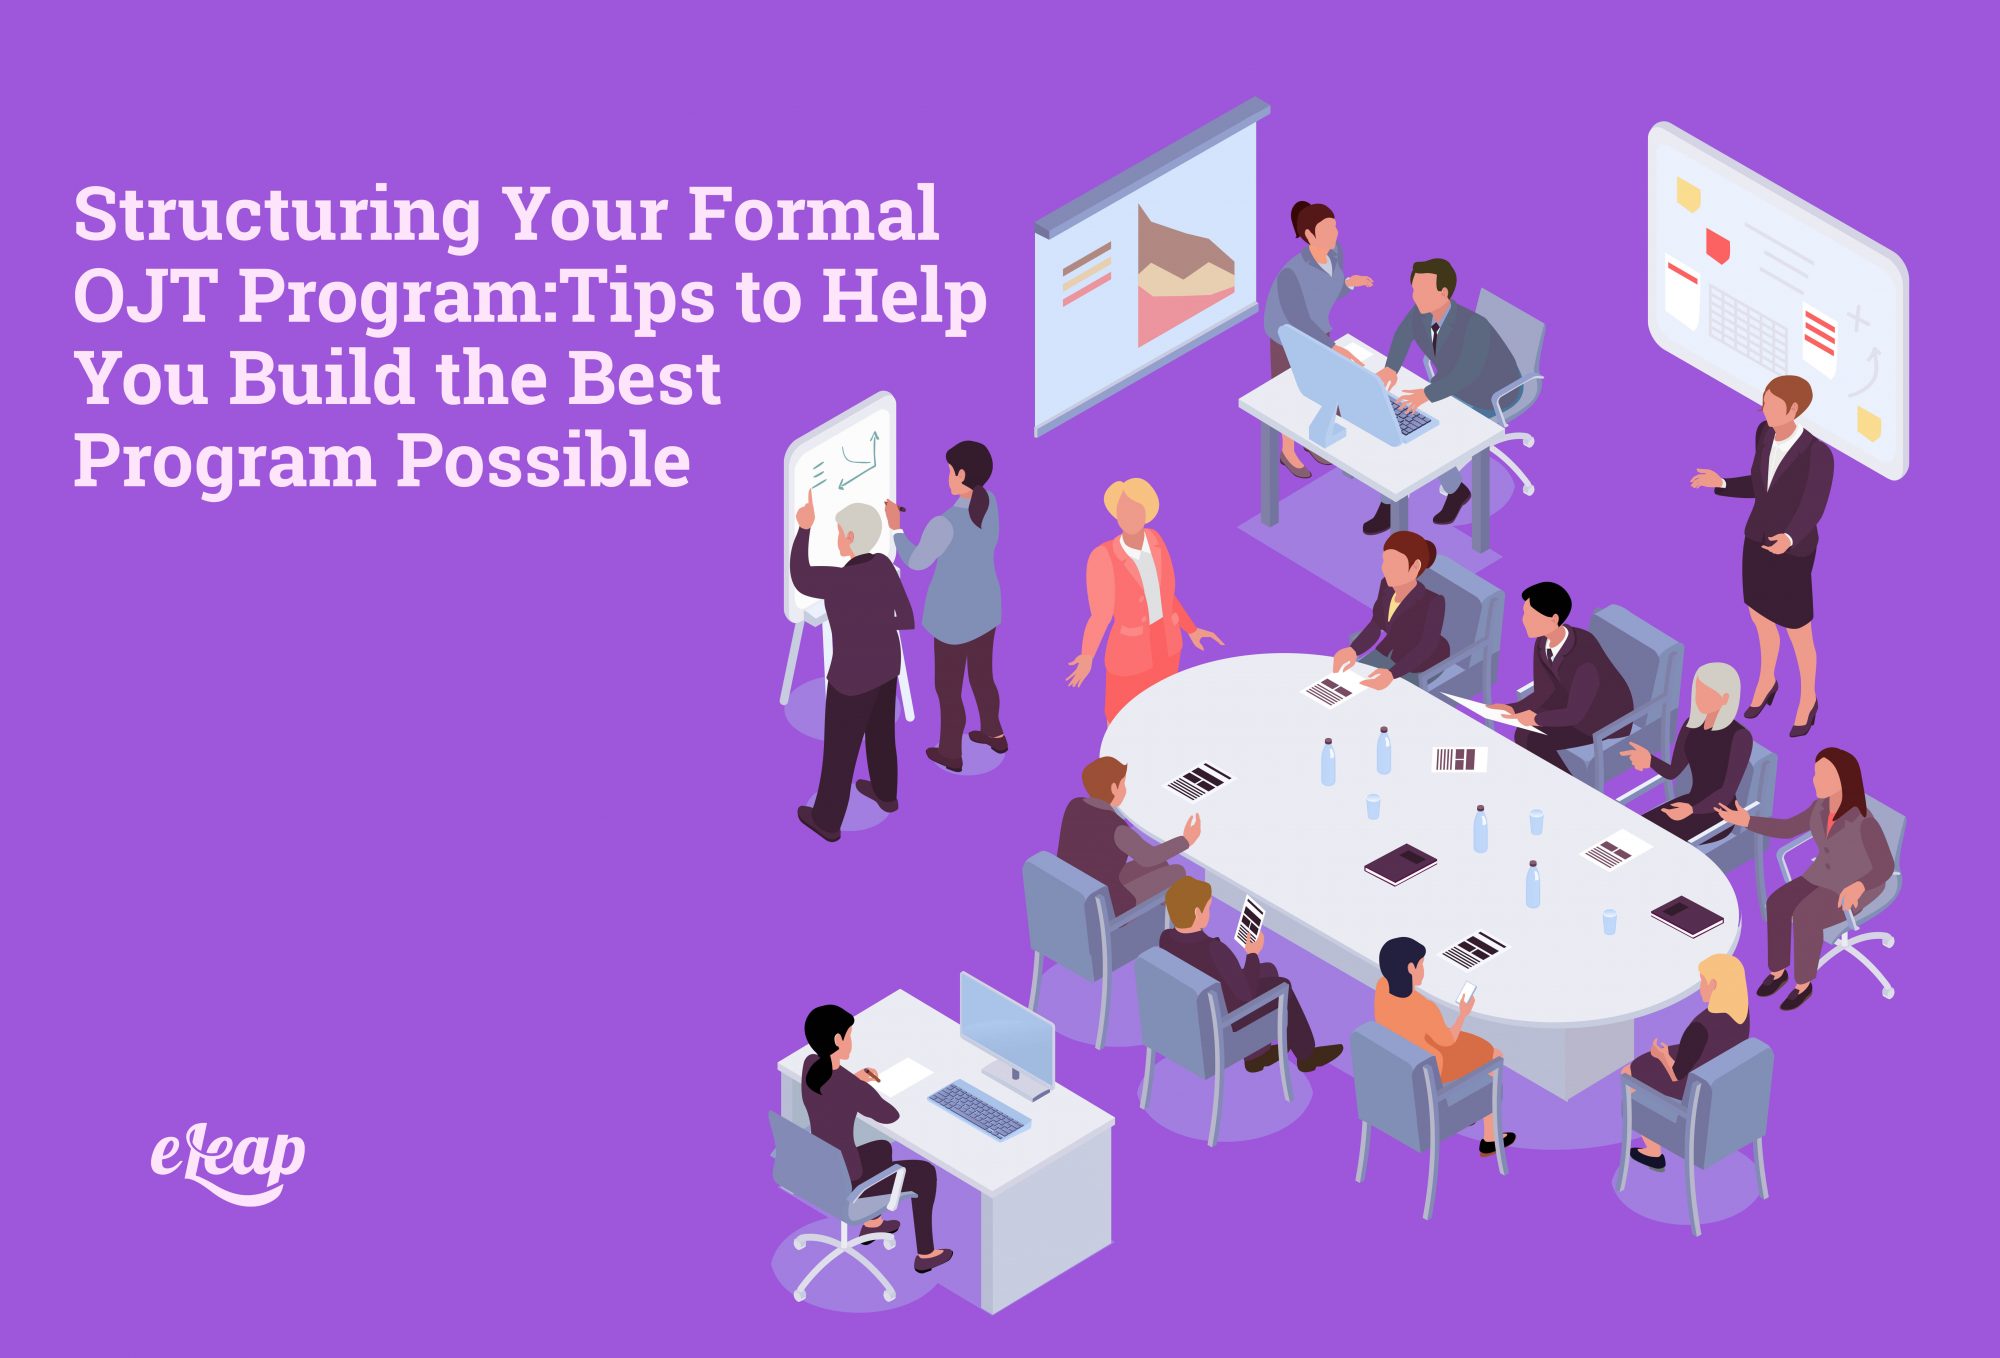 Structuring Your Formal OJT Program: Tips to Help You Build the Best Program Possible